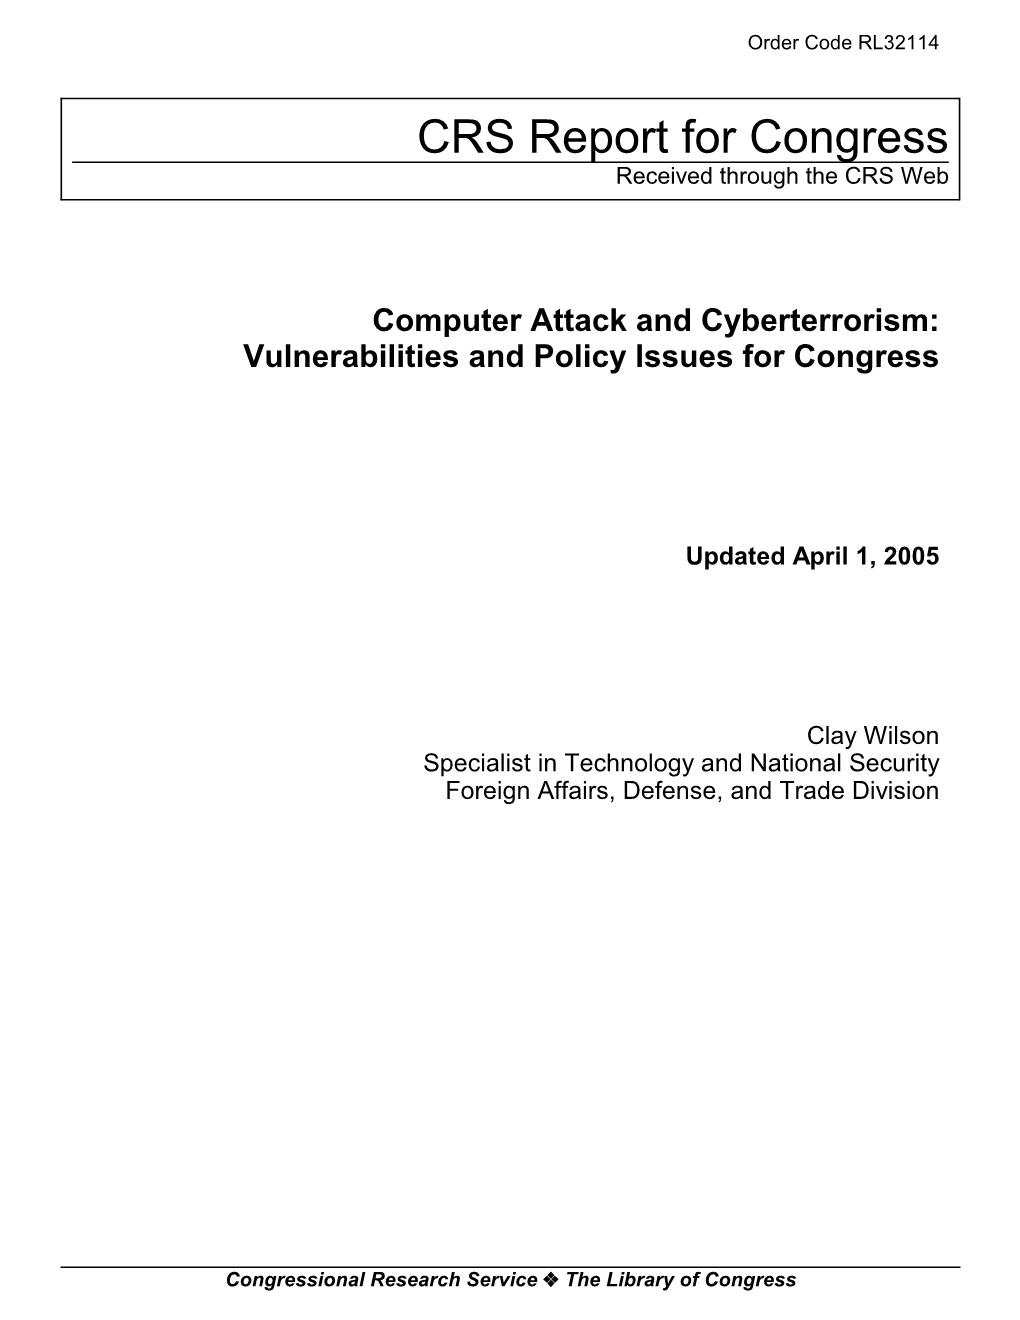 Computer Attack and Cyberterrorism: Vulnerabilities and Policy Issues for Congress